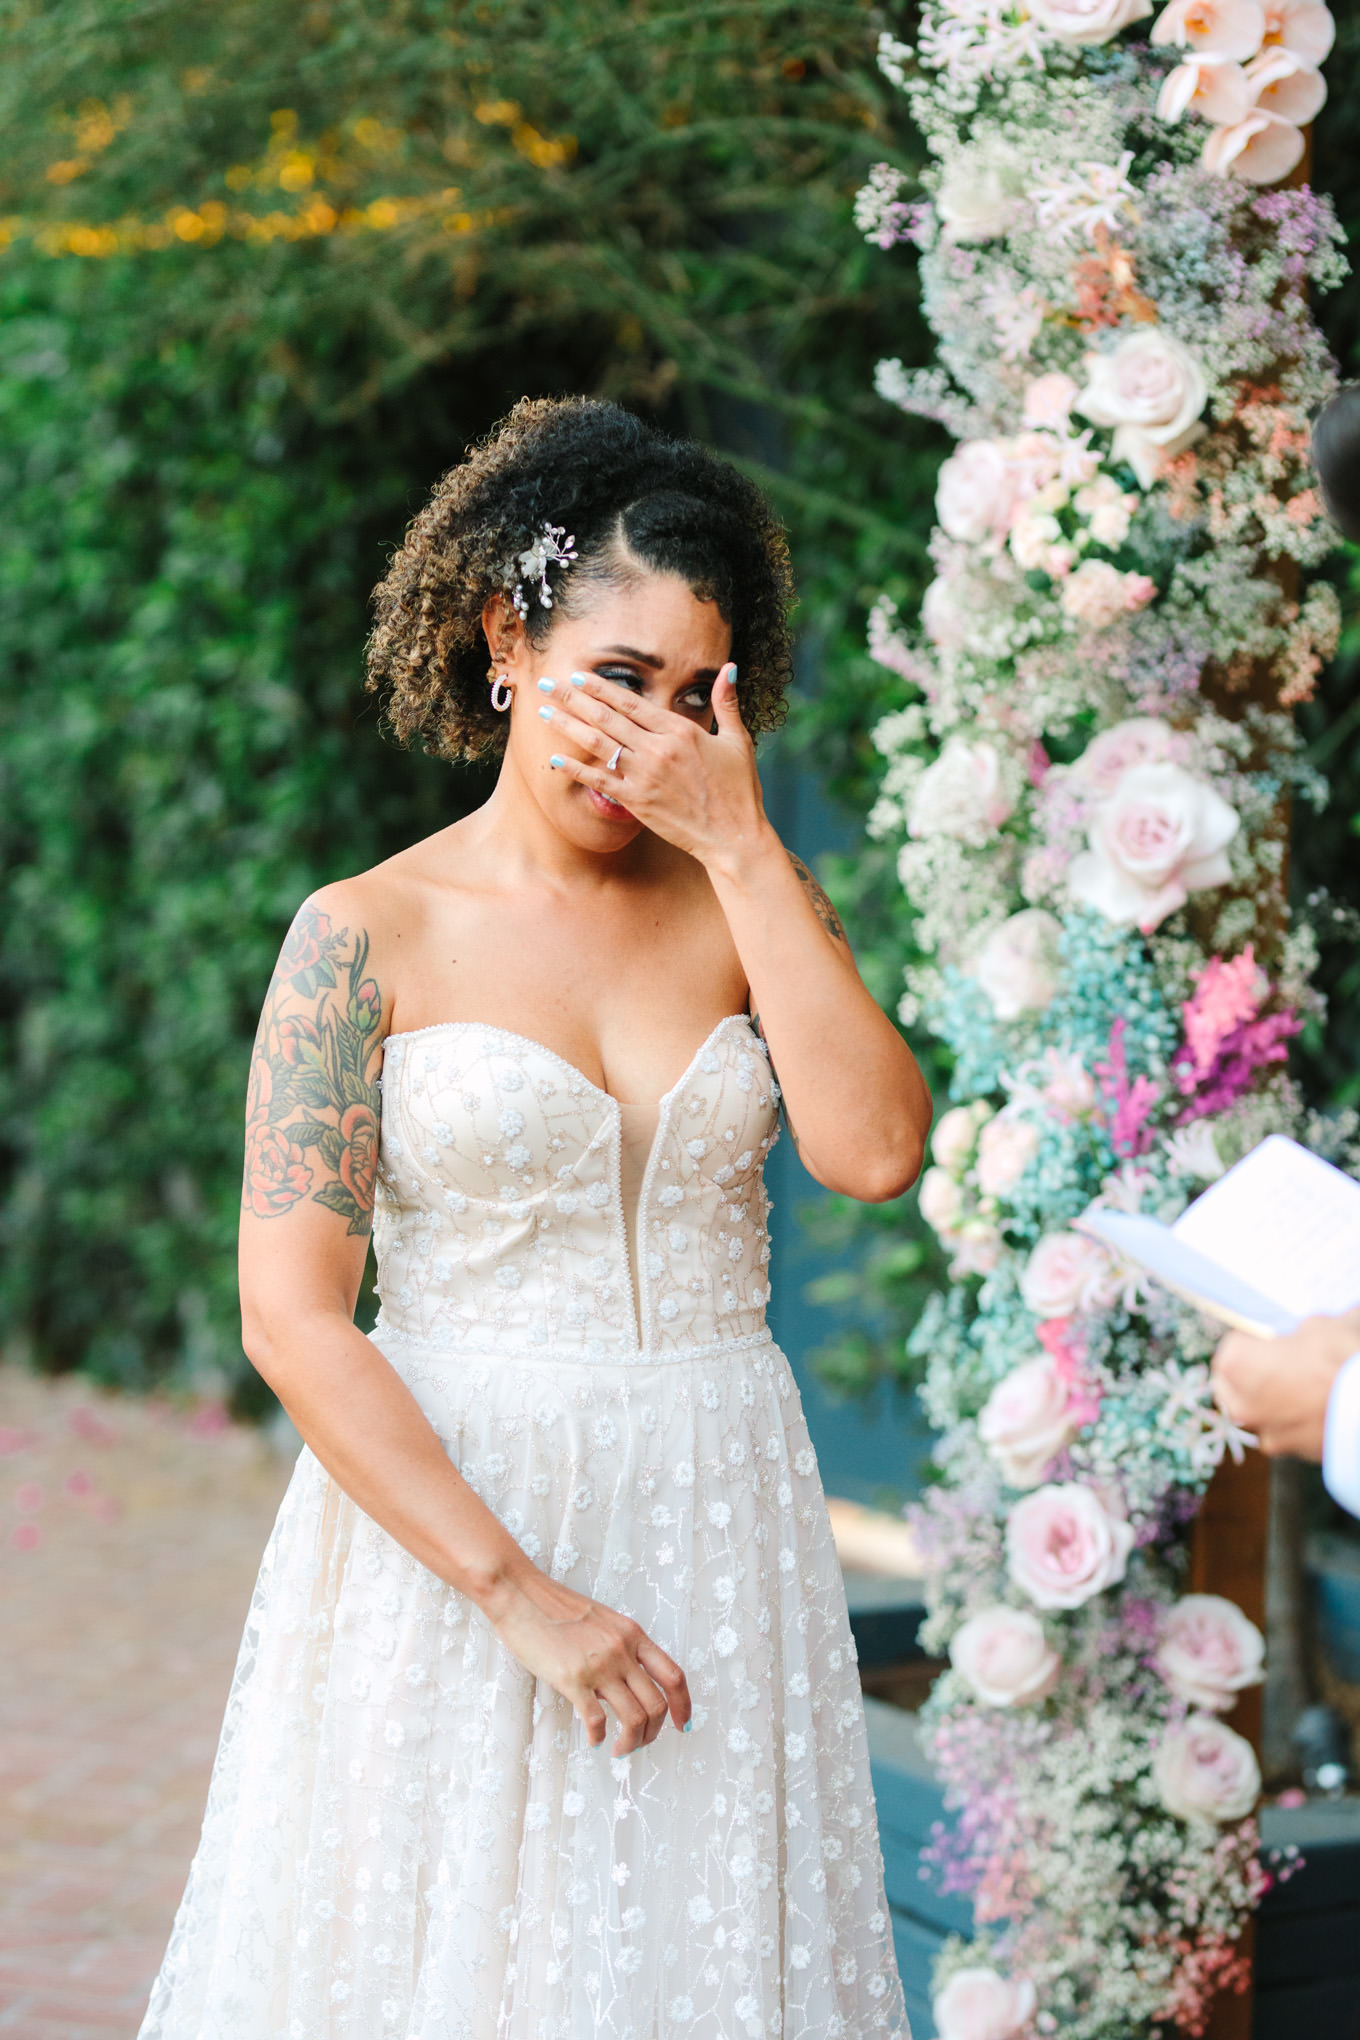 Bride crying at wedding ceremony | Colorful pop-up micro wedding at The Ruby Street Los Angeles featured on Green Wedding Shoes | Colorful and elevated photography for fun-loving couples in Southern California | #colorfulwedding #popupwedding #weddingphotography #microwedding Source: Mary Costa Photography | Los Angeles